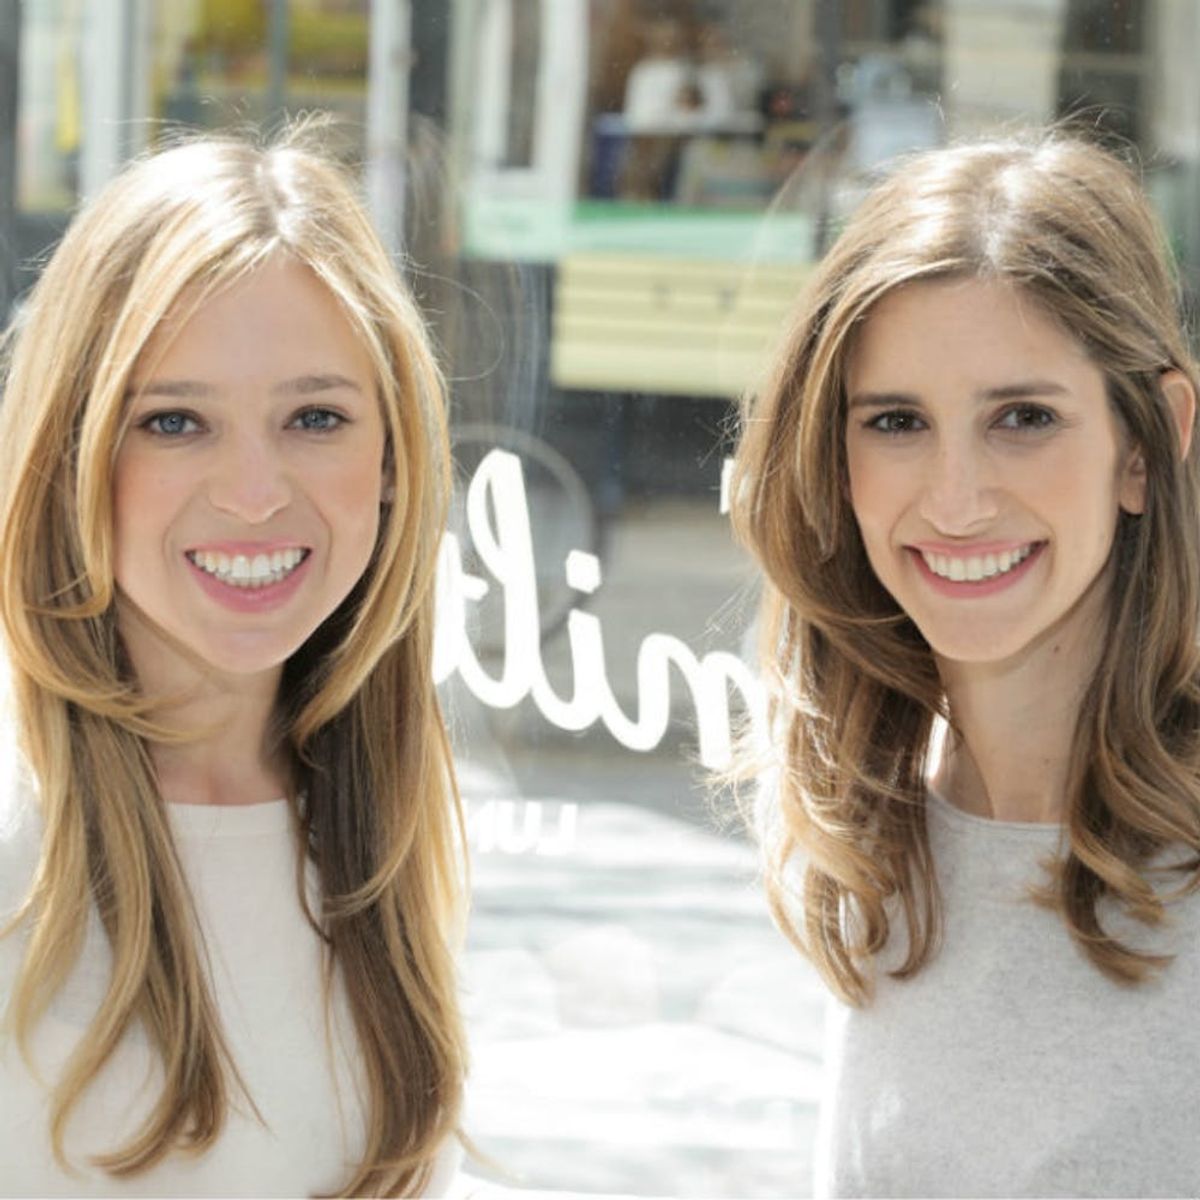 TheSkimm Founders Share Advice on Starting a Successful Company With Your Friend